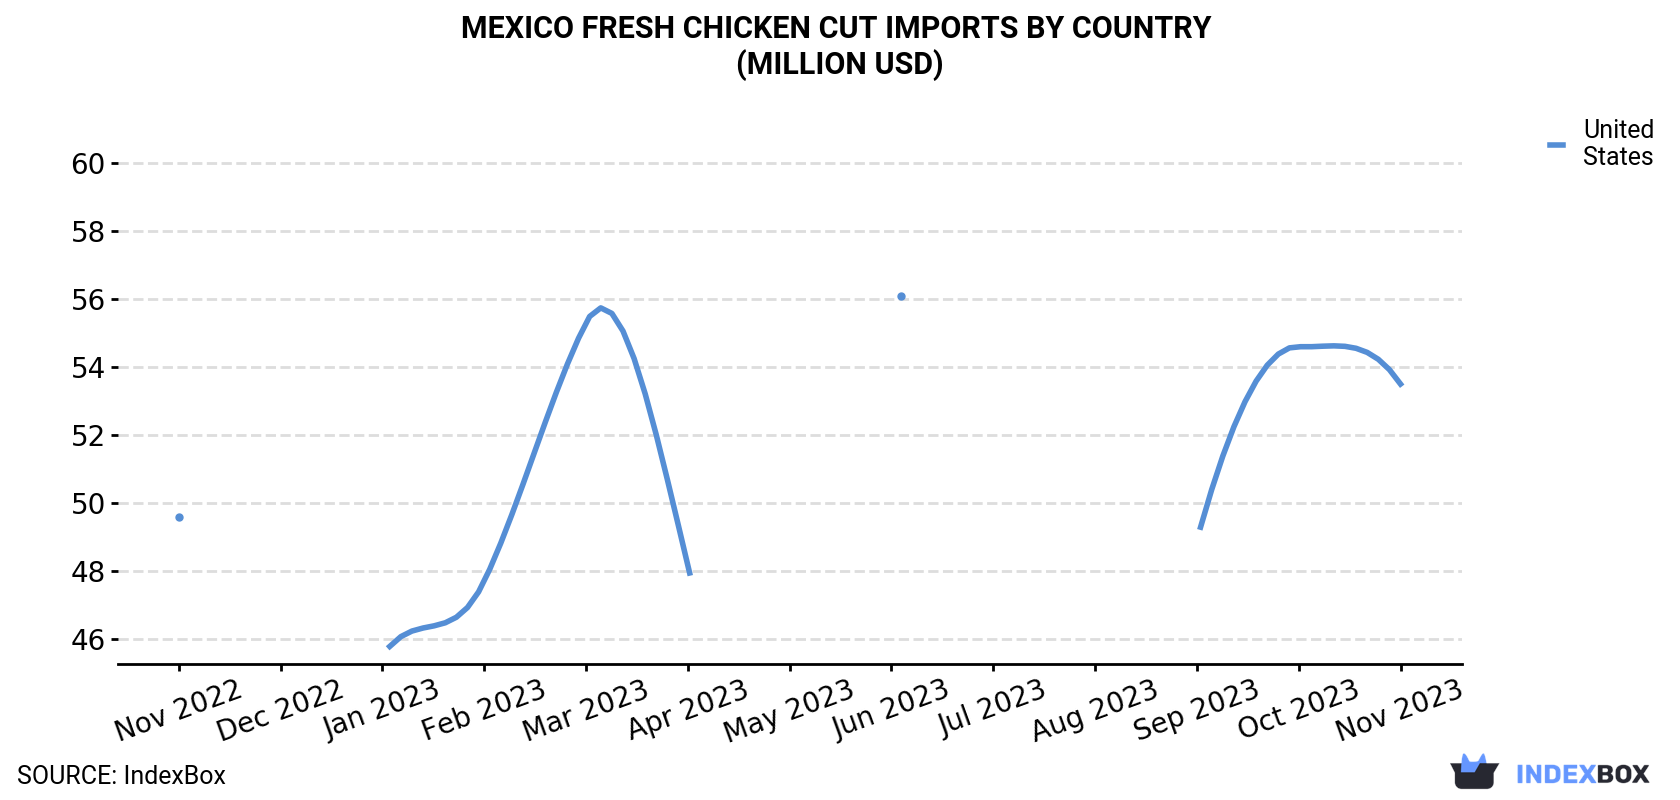 Mexico Fresh Chicken Cut Imports By Country (Million USD)